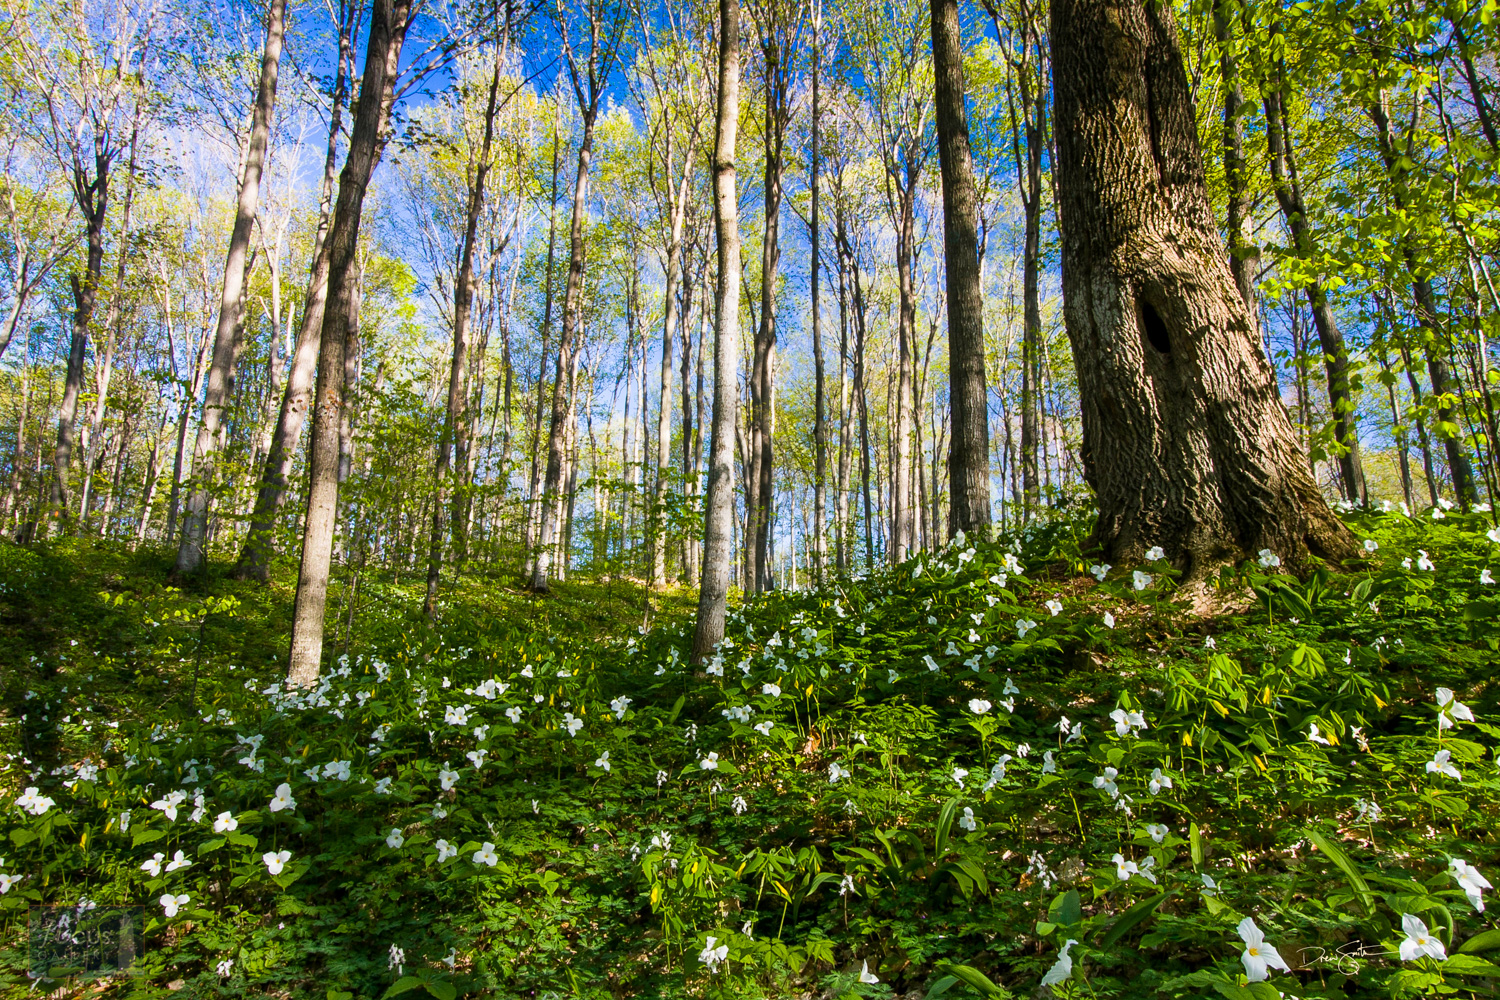 Spring wildflowers fill the forest floor at Pete's Woods in the Arcadia Dunes Nature Preserve.